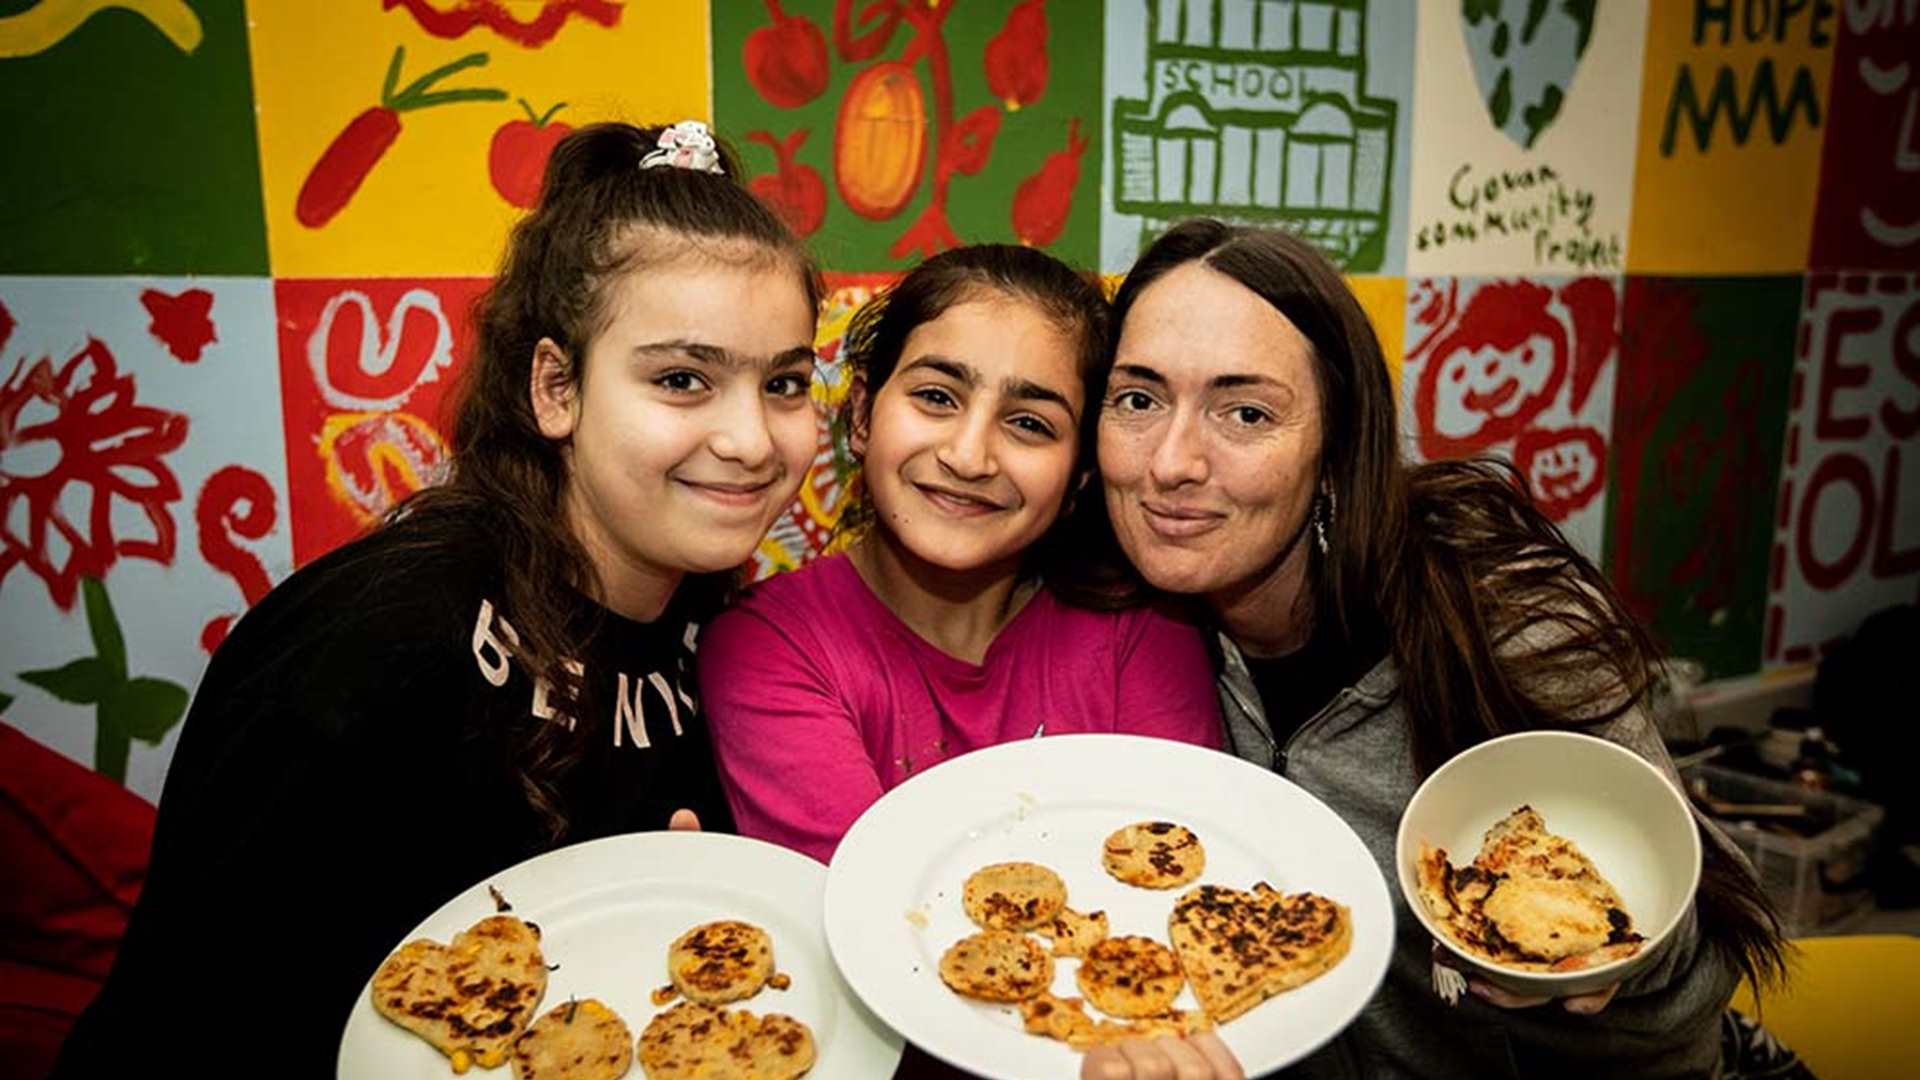 A woman and two children display food they have cooked from scratch